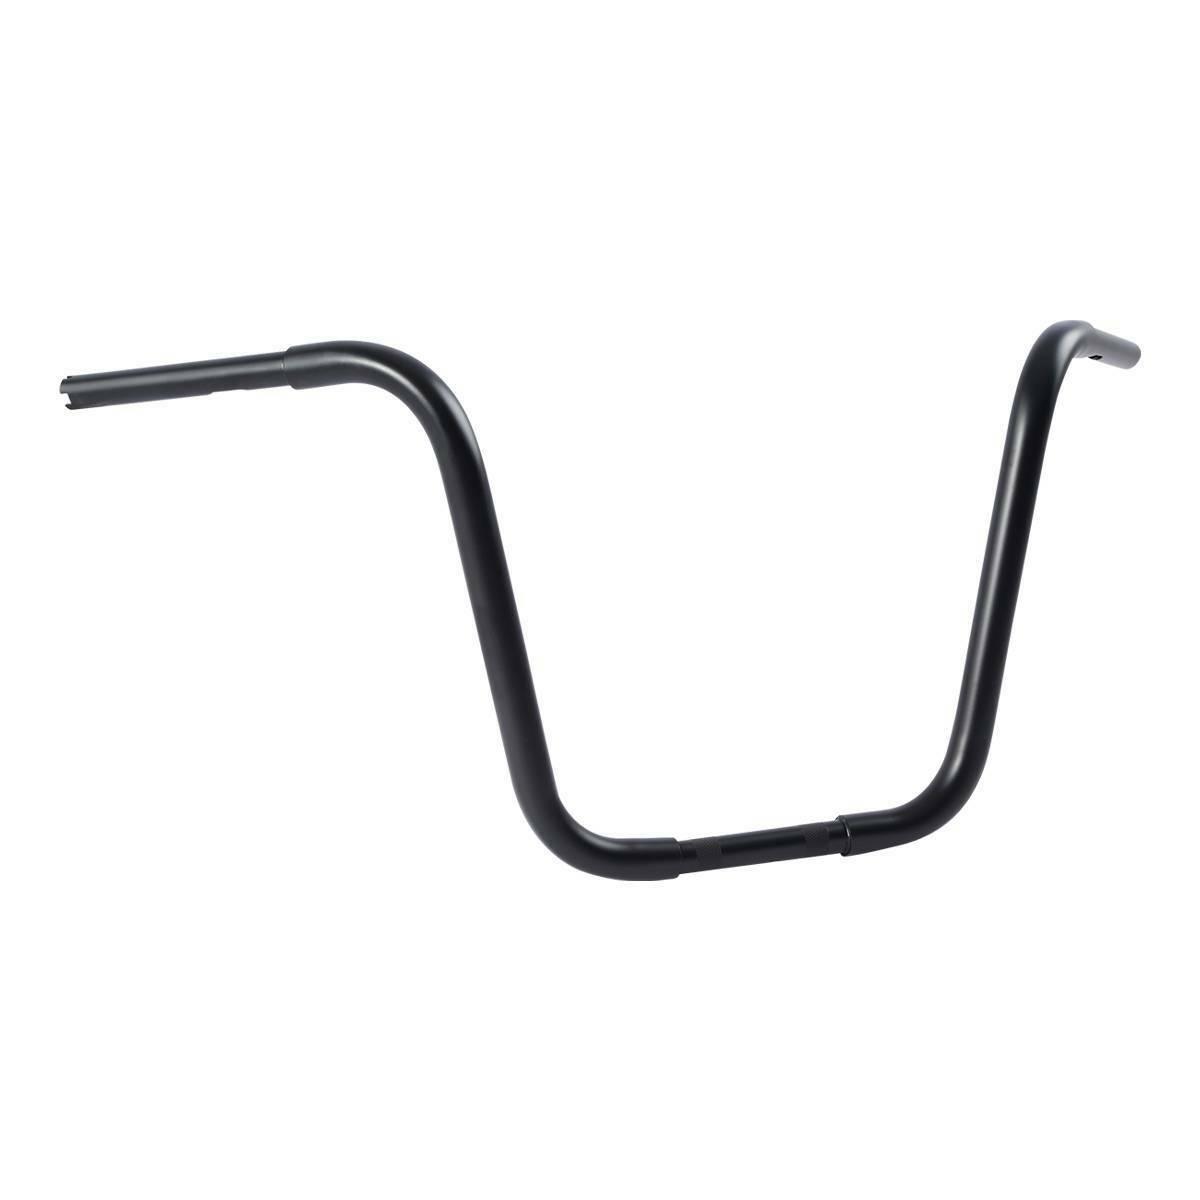 16" Rise 1-1/4" Fat Ape Hangers Handlebar Fit For Harley Sportster XL 883 XL1200 - Moto Life Products